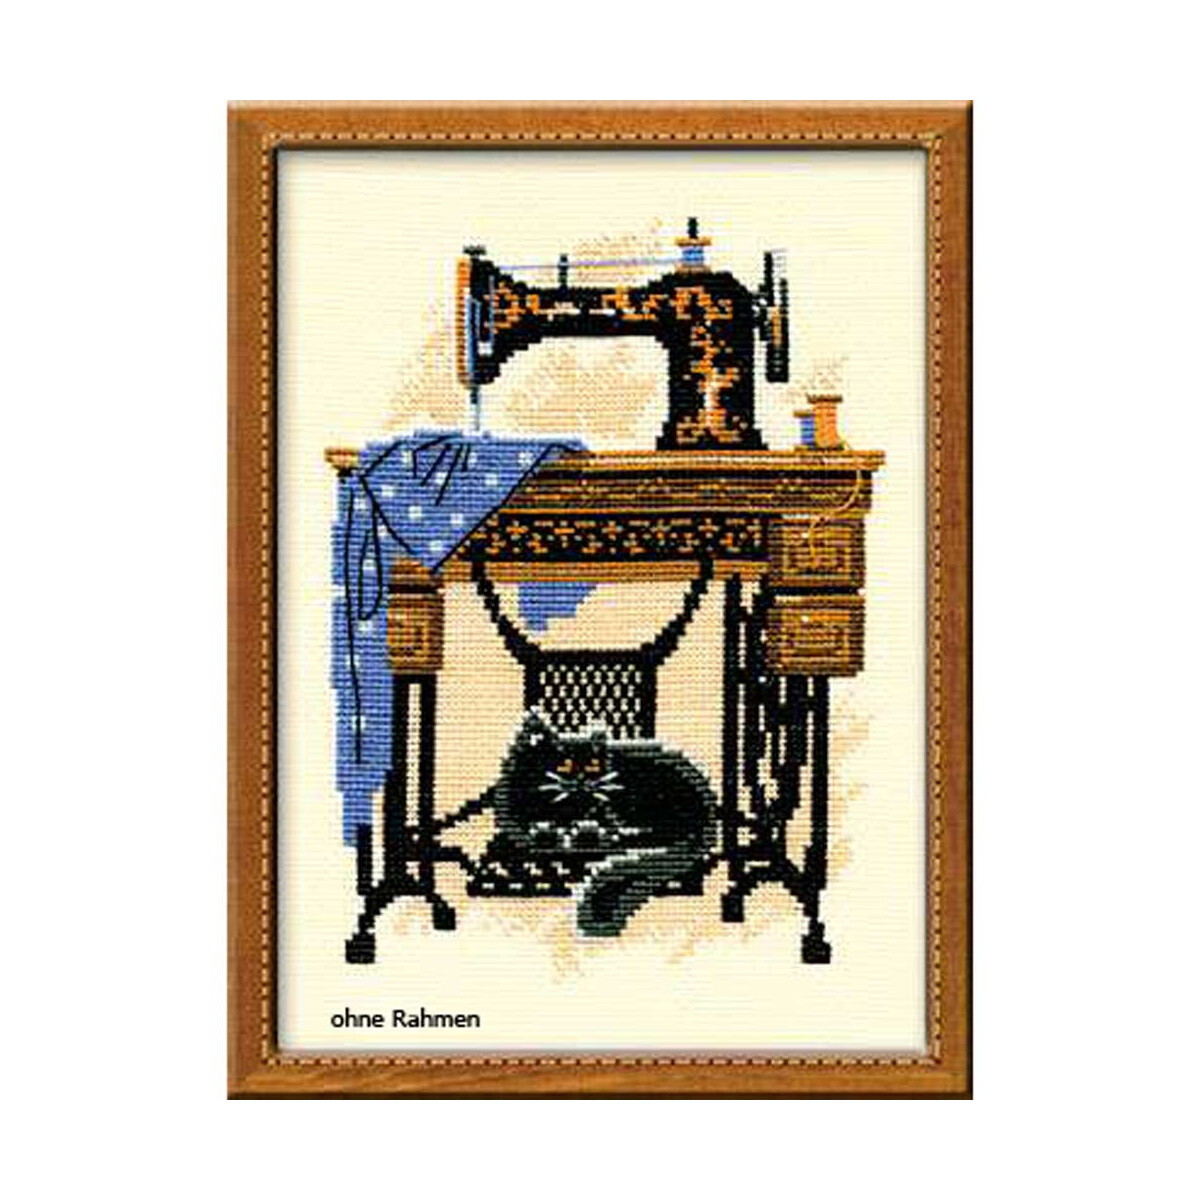 Cross-stitched picture in a frame, depicting an antique...